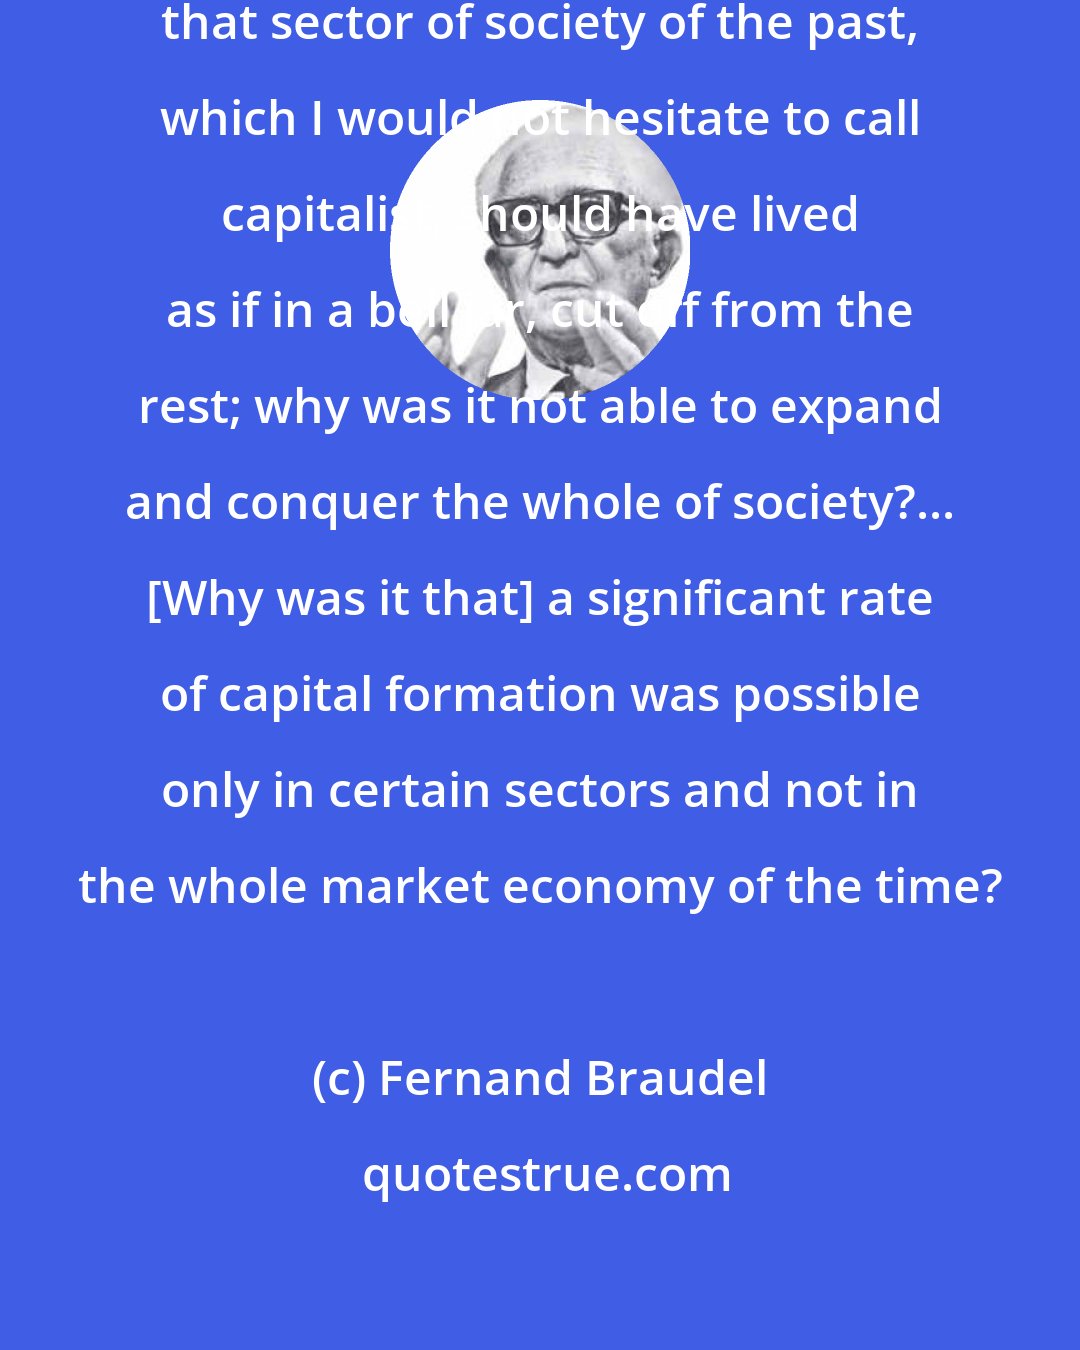 Fernand Braudel: The key problem is to find out why that sector of society of the past, which I would not hesitate to call capitalist, should have lived as if in a bell jar, cut off from the rest; why was it not able to expand and conquer the whole of society?... [Why was it that] a significant rate of capital formation was possible only in certain sectors and not in the whole market economy of the time?